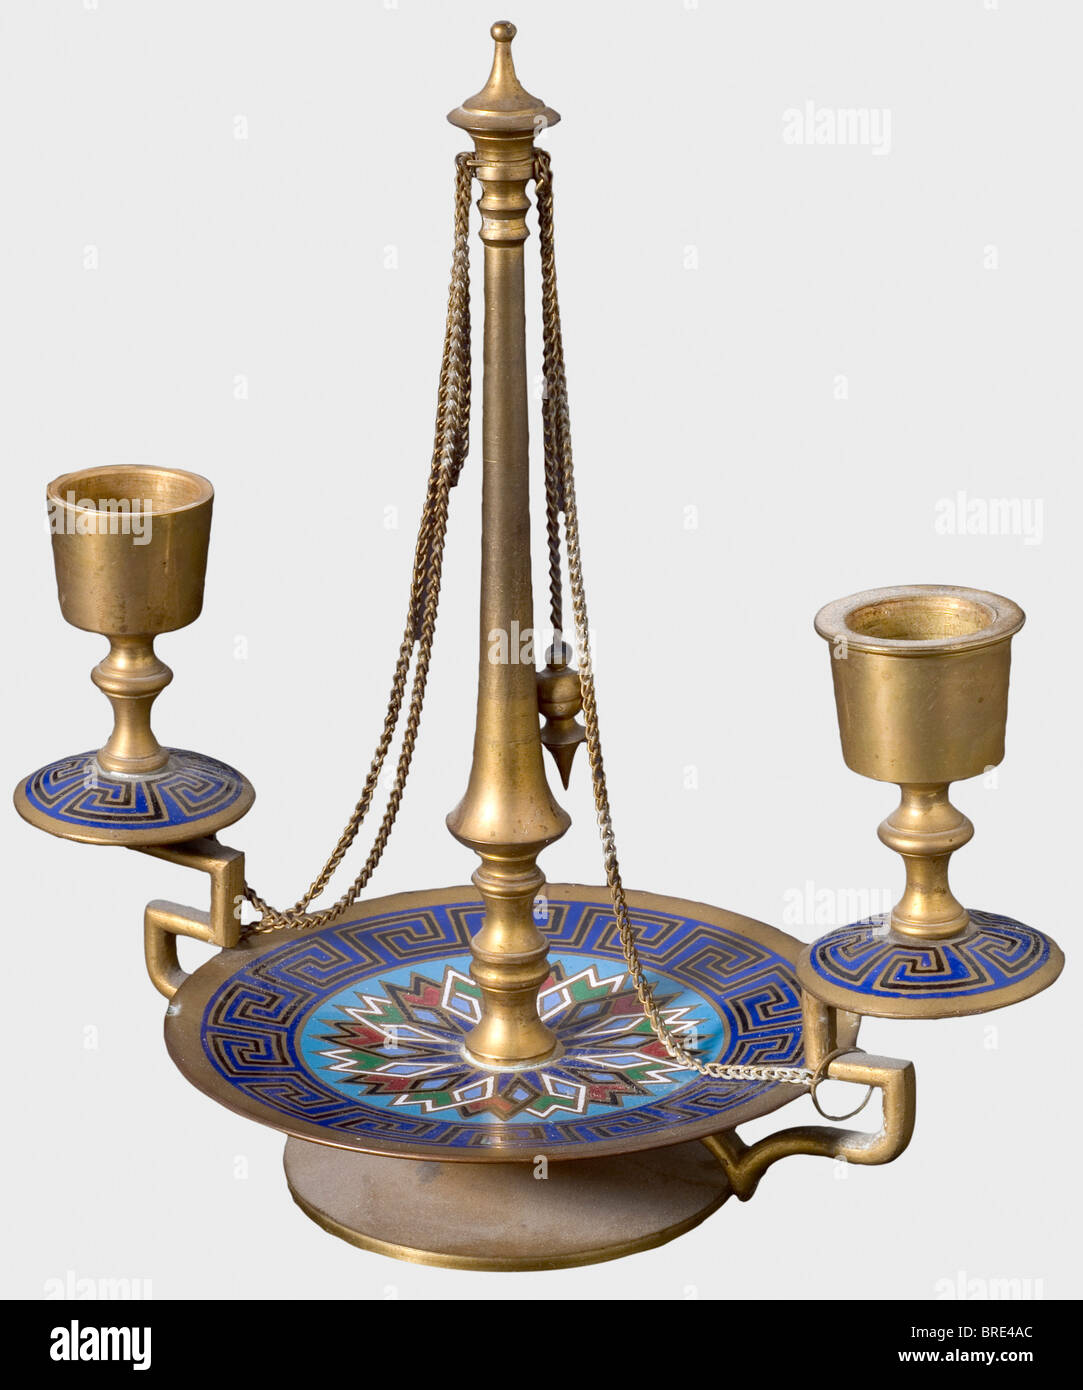 Two pairs of candlesticks, circa 1900. Brass, formerly gilt and painted, or gilt and enamelled brass. One candle stick bears the inventory label, 'H.V.v.W. G.v.R. Privat-Eigentum' for Duchess Vera of Württemberg, Grand Duchess of Russia. Height of each 21 cm. The enamelled pair of candlesticks comes from the so-called 'Turkish Room'. Provenance: Grand Duchess Vera Konstantinovna Romanova (1854 - 1912). historic, historical, 1900s, 20th century, 19th century, object, objects, stills, clipping, clippings, cut out, cut-out, cut-outs, fine arts, art, art object, ar, Stock Photo